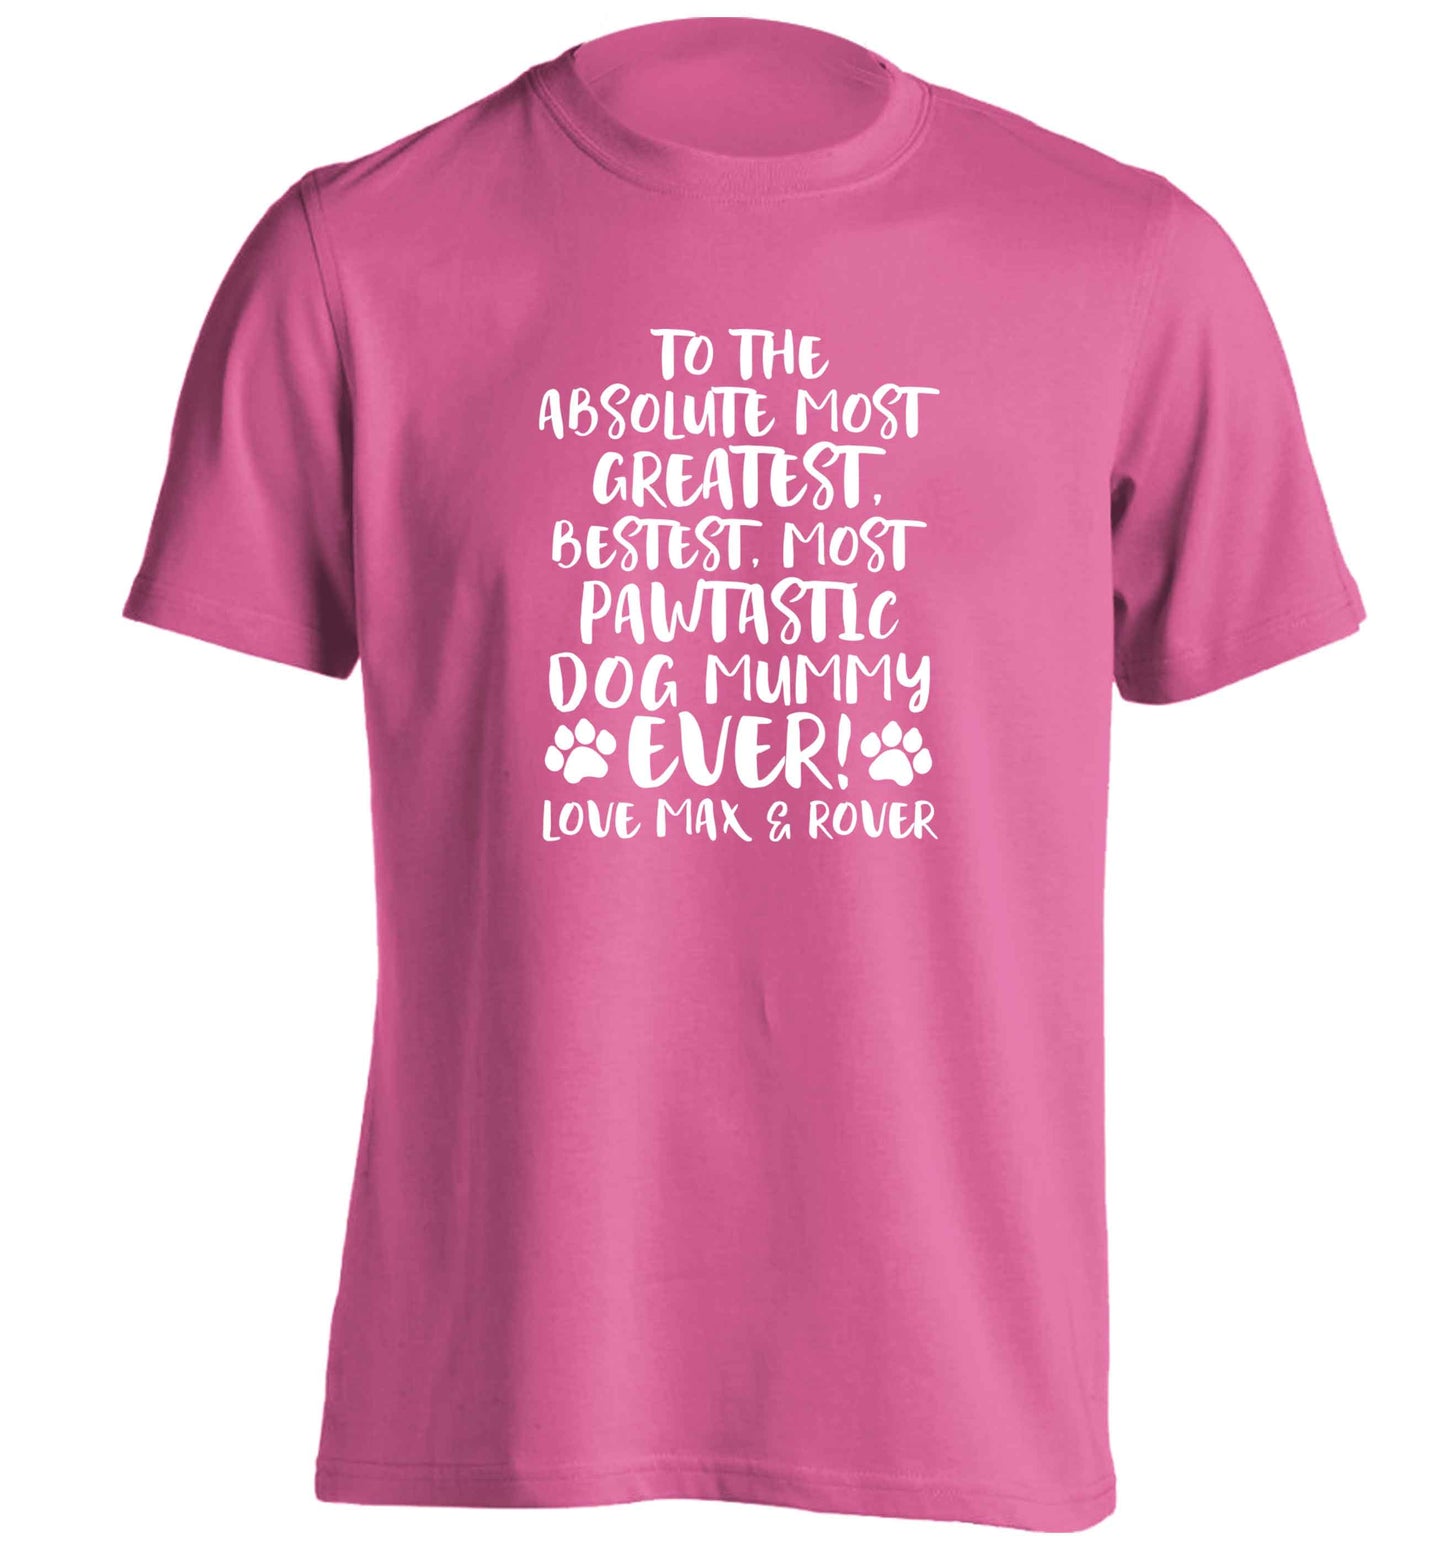 Personalsied to the most pawtastic dog mummy ever adults unisex pink Tshirt 2XL